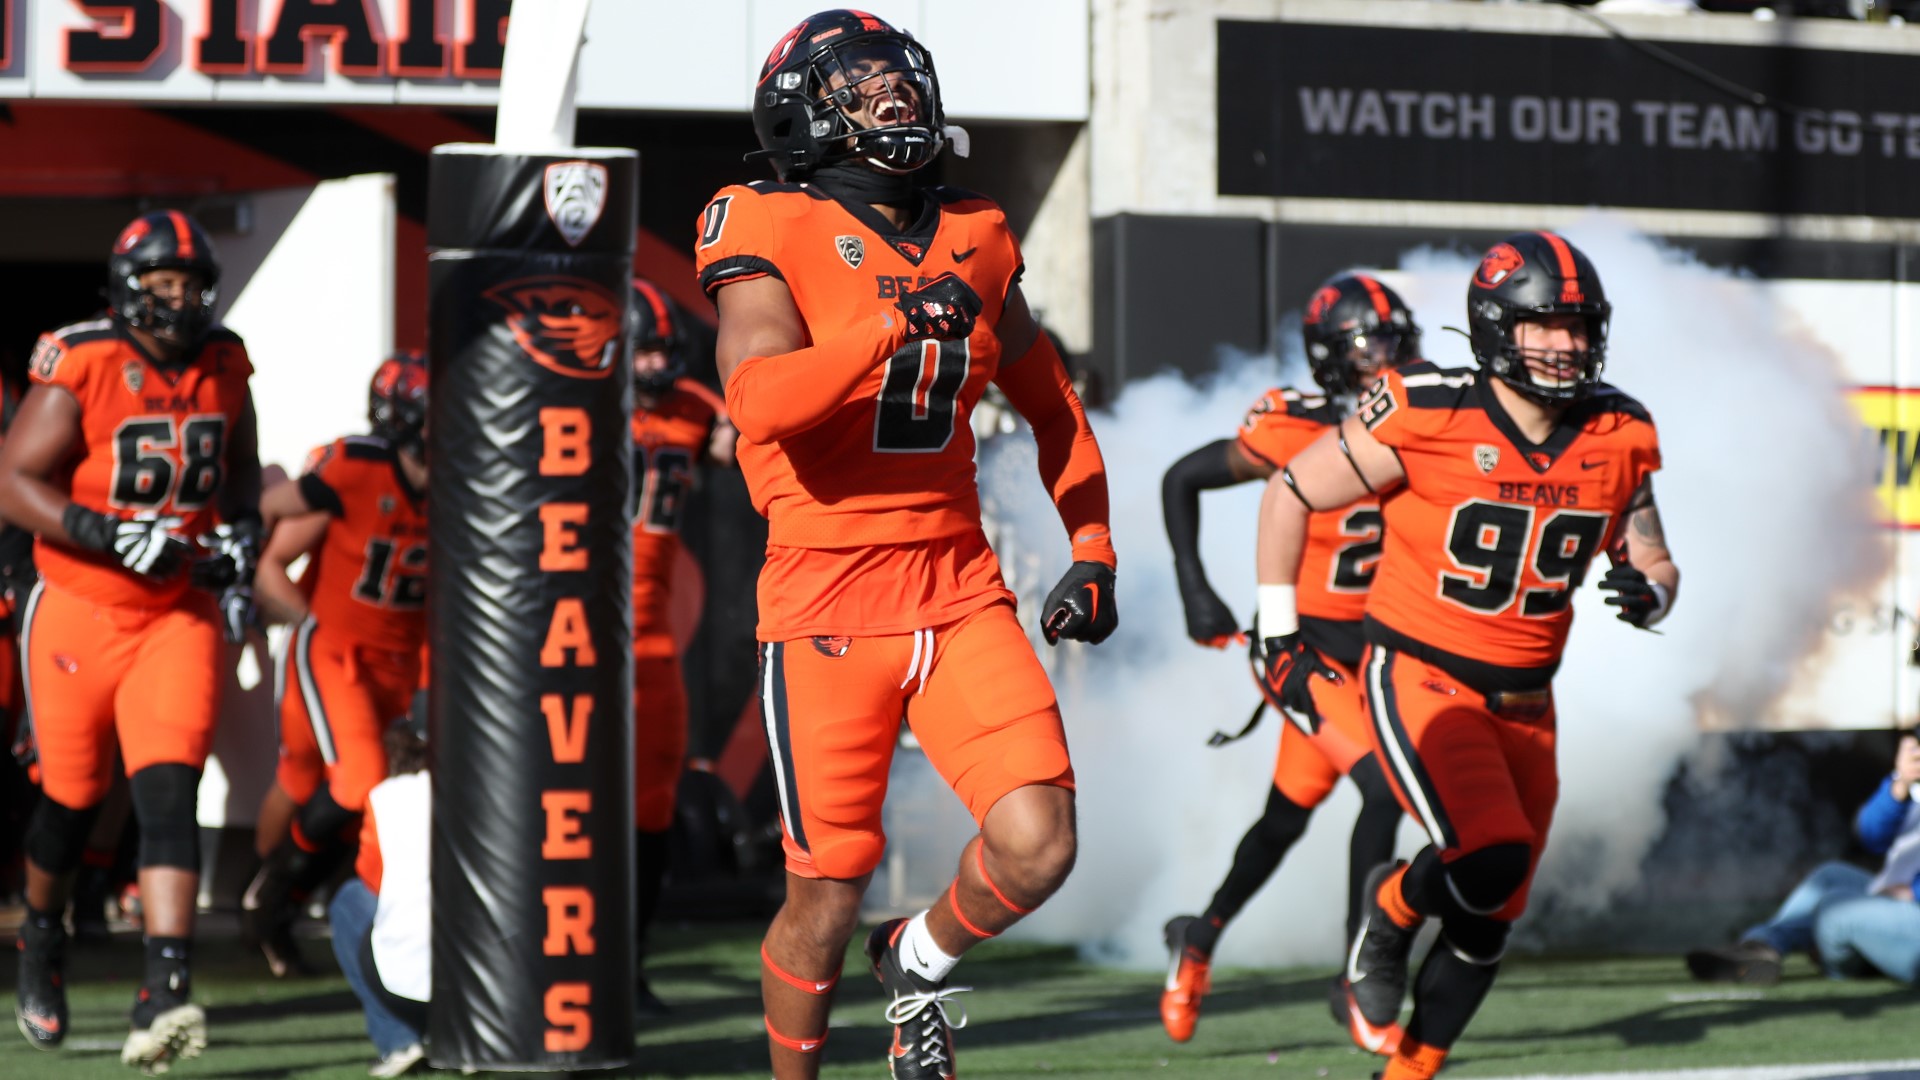 Here are the bowl game matchups for Beavers, Ducks